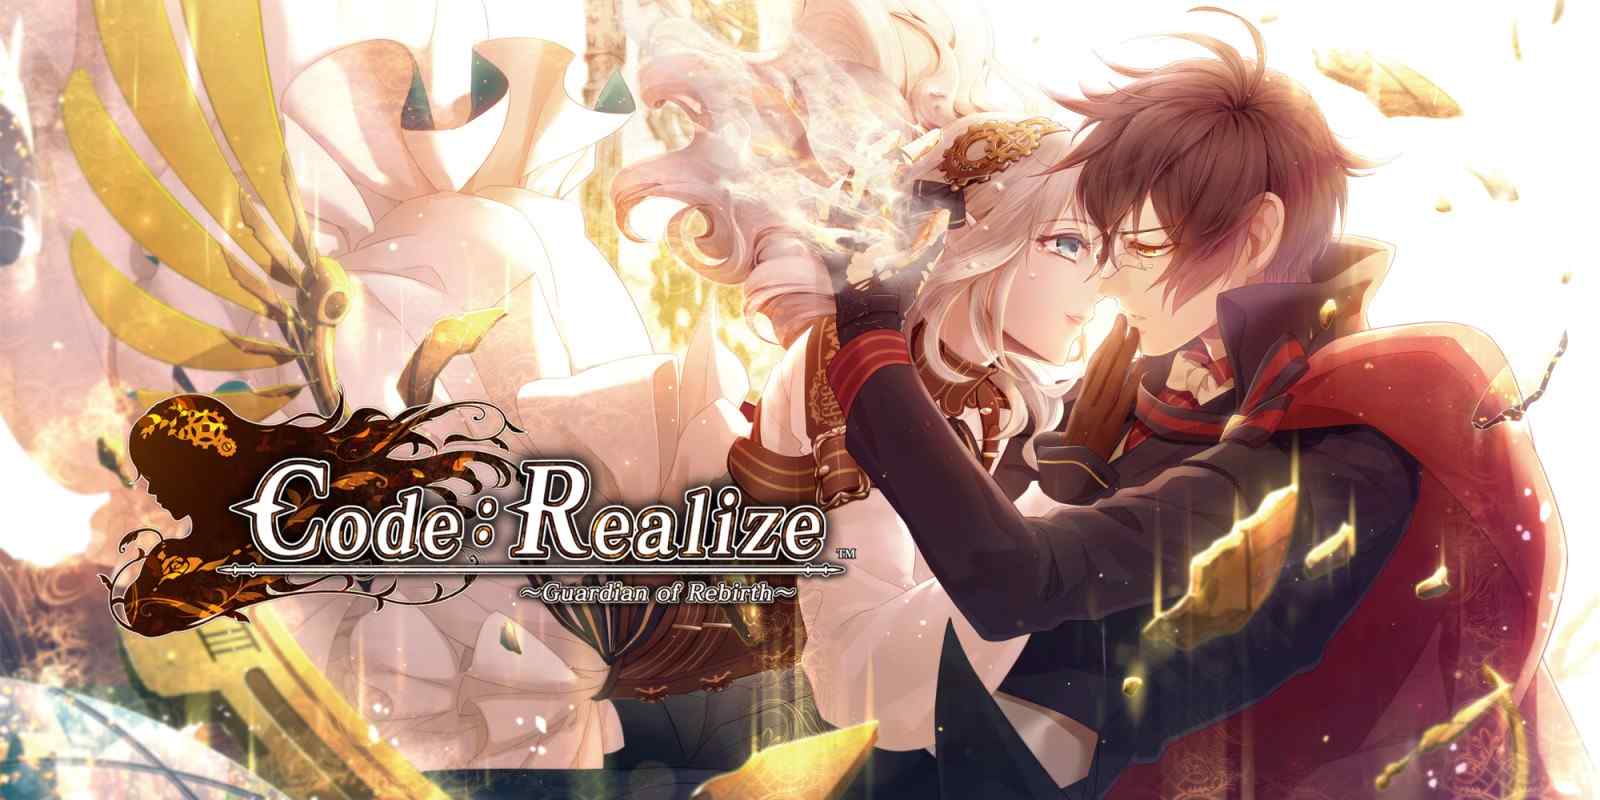 Code: Realize - Guardian of Rebirth is an Otome visual novel by Otomate.